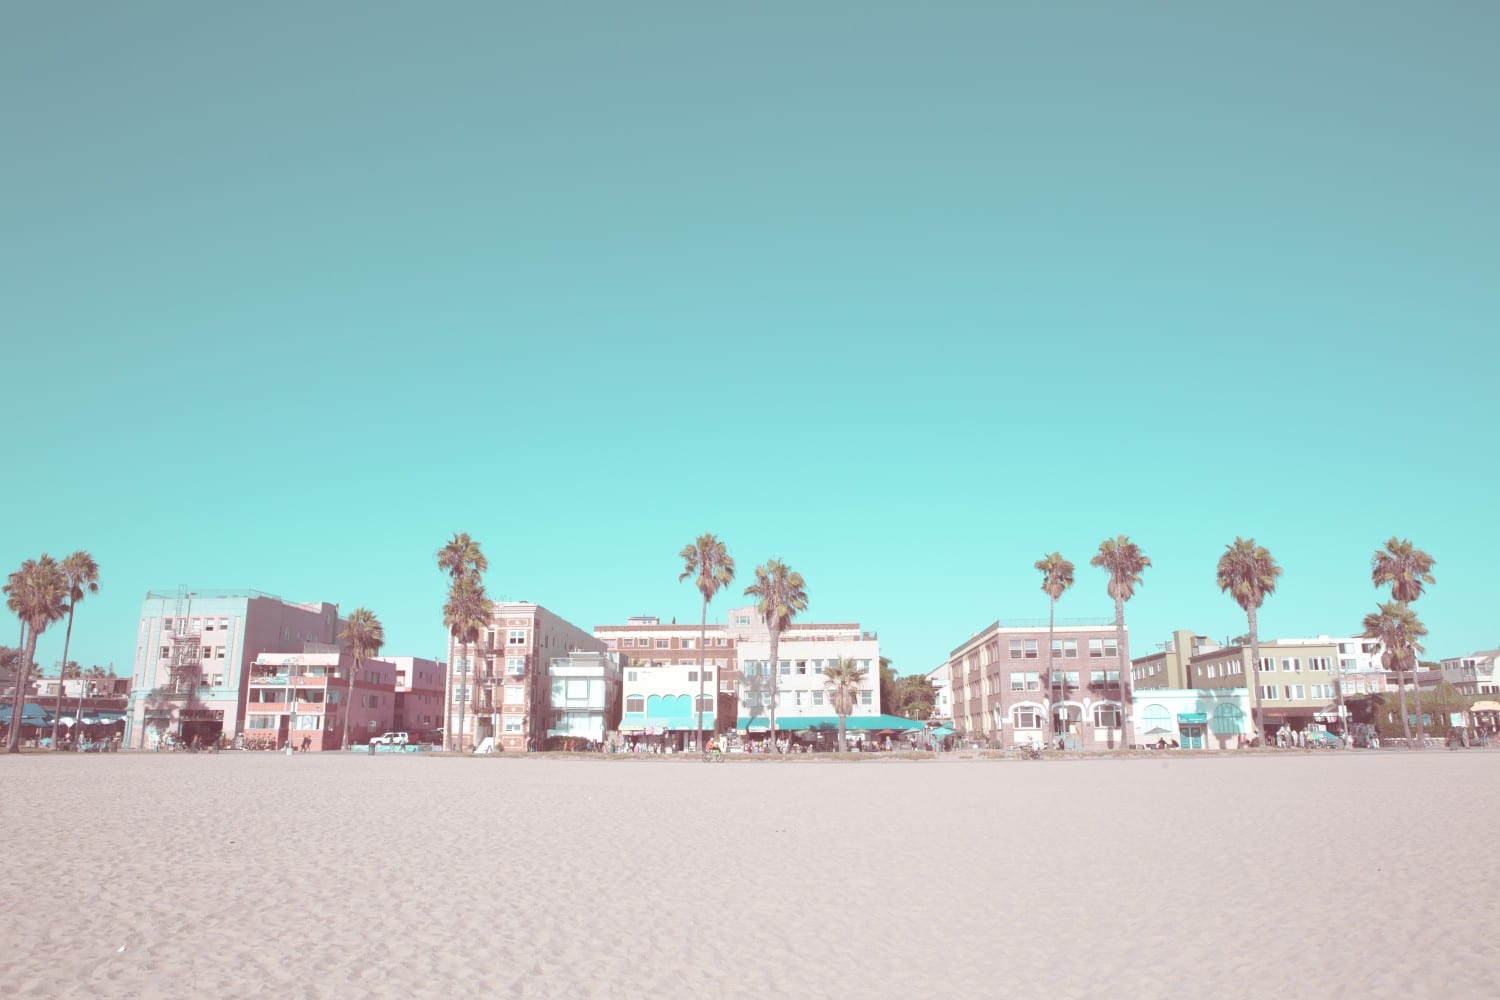 Venice Beach - One of the Cool Places in Los Angeles